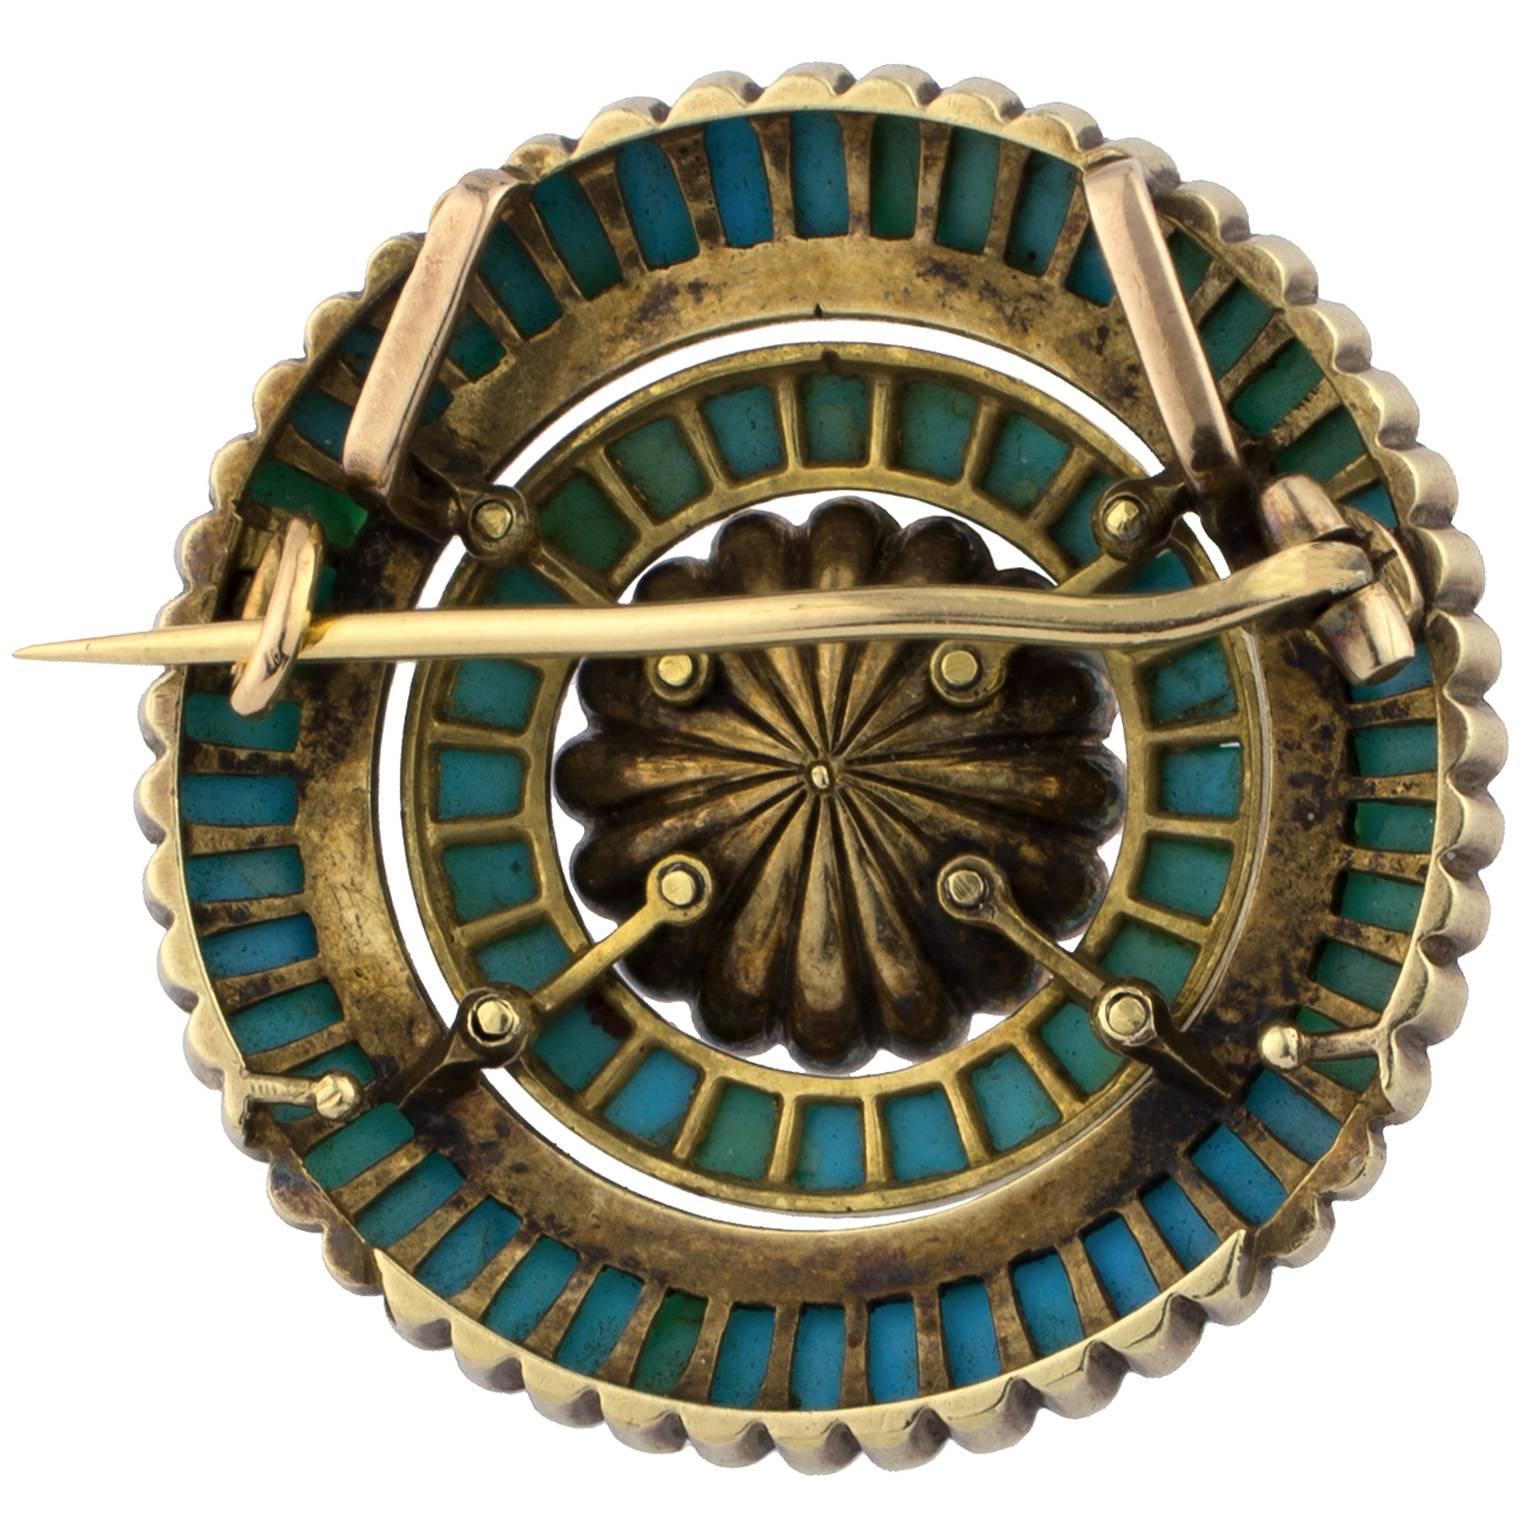 19th century Victorian brooch decorated with a central pearl surrounded by layers of diamonds and turquoises in a rosette setting.